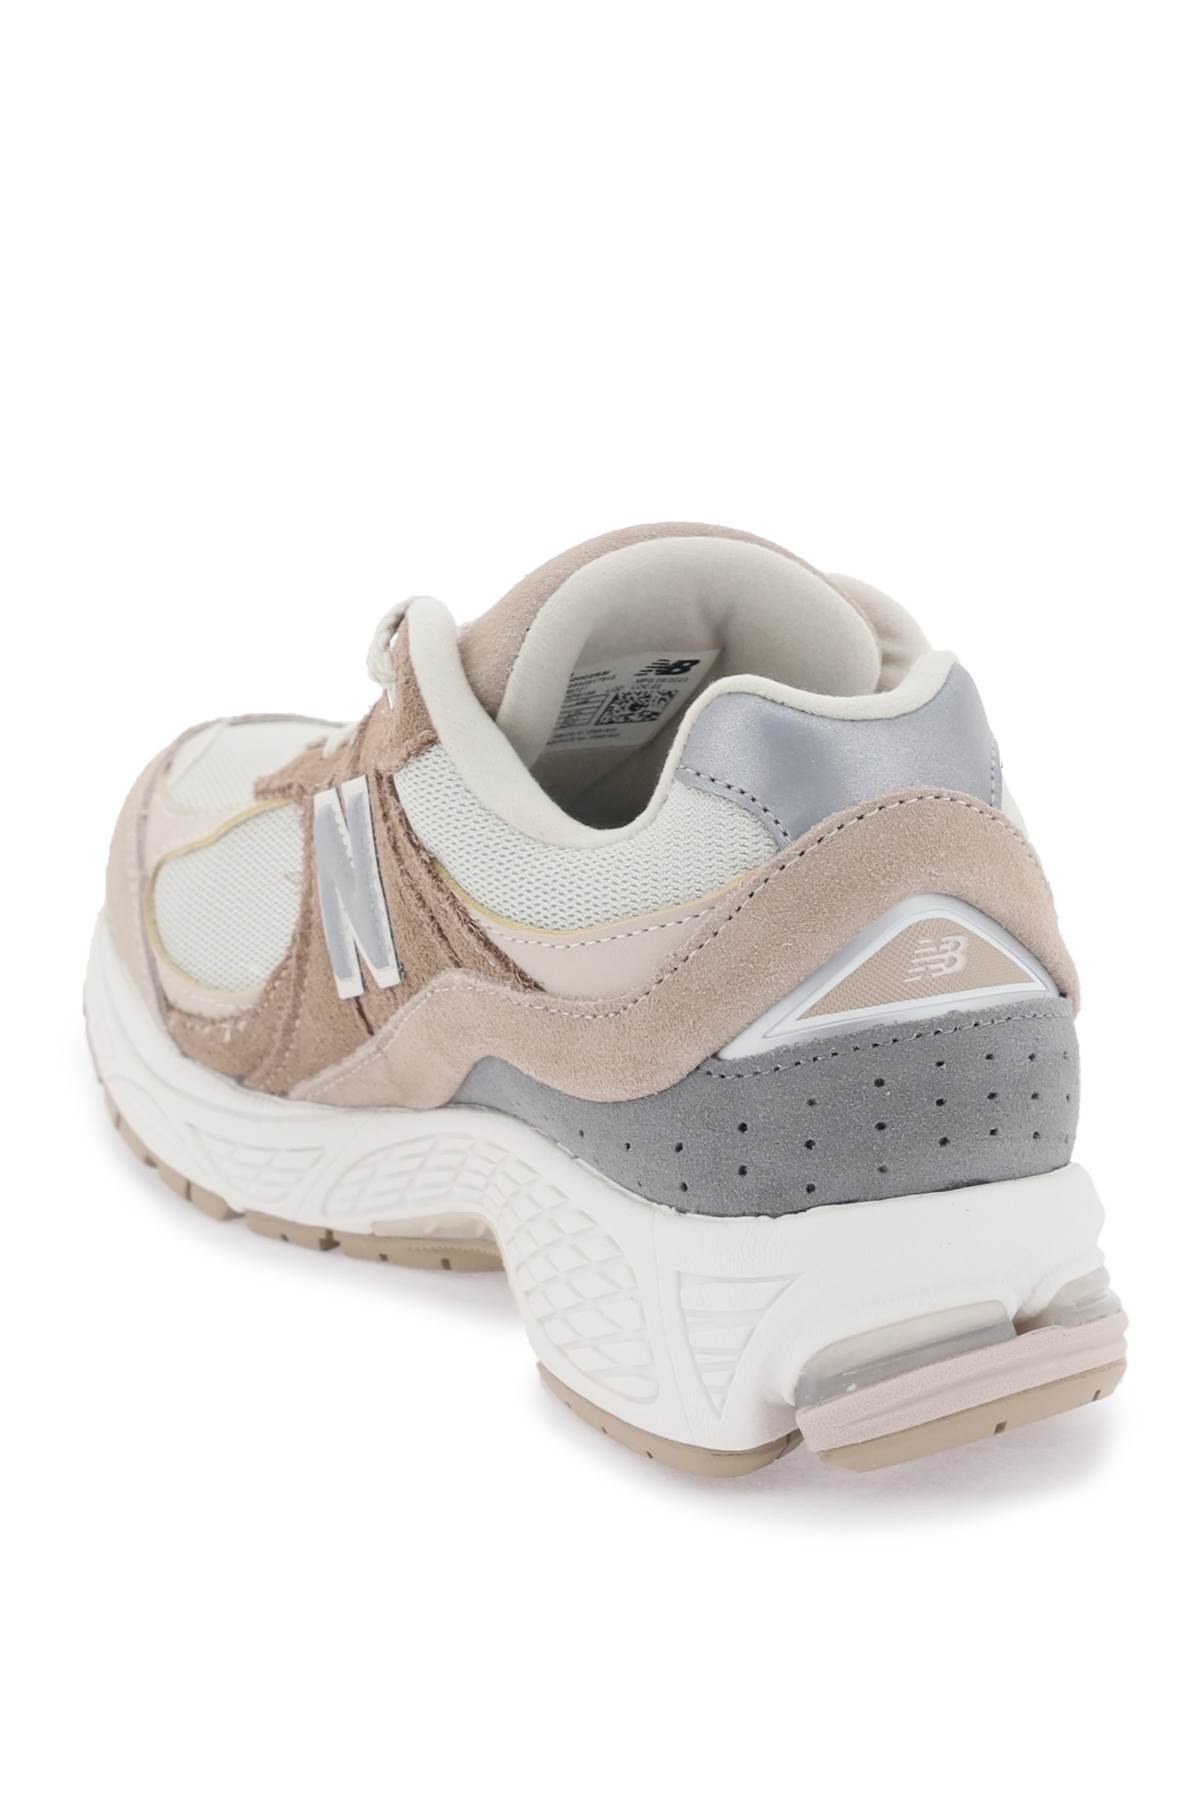 Shop New Balance 2002r Sneakers In Driftwood (beige)